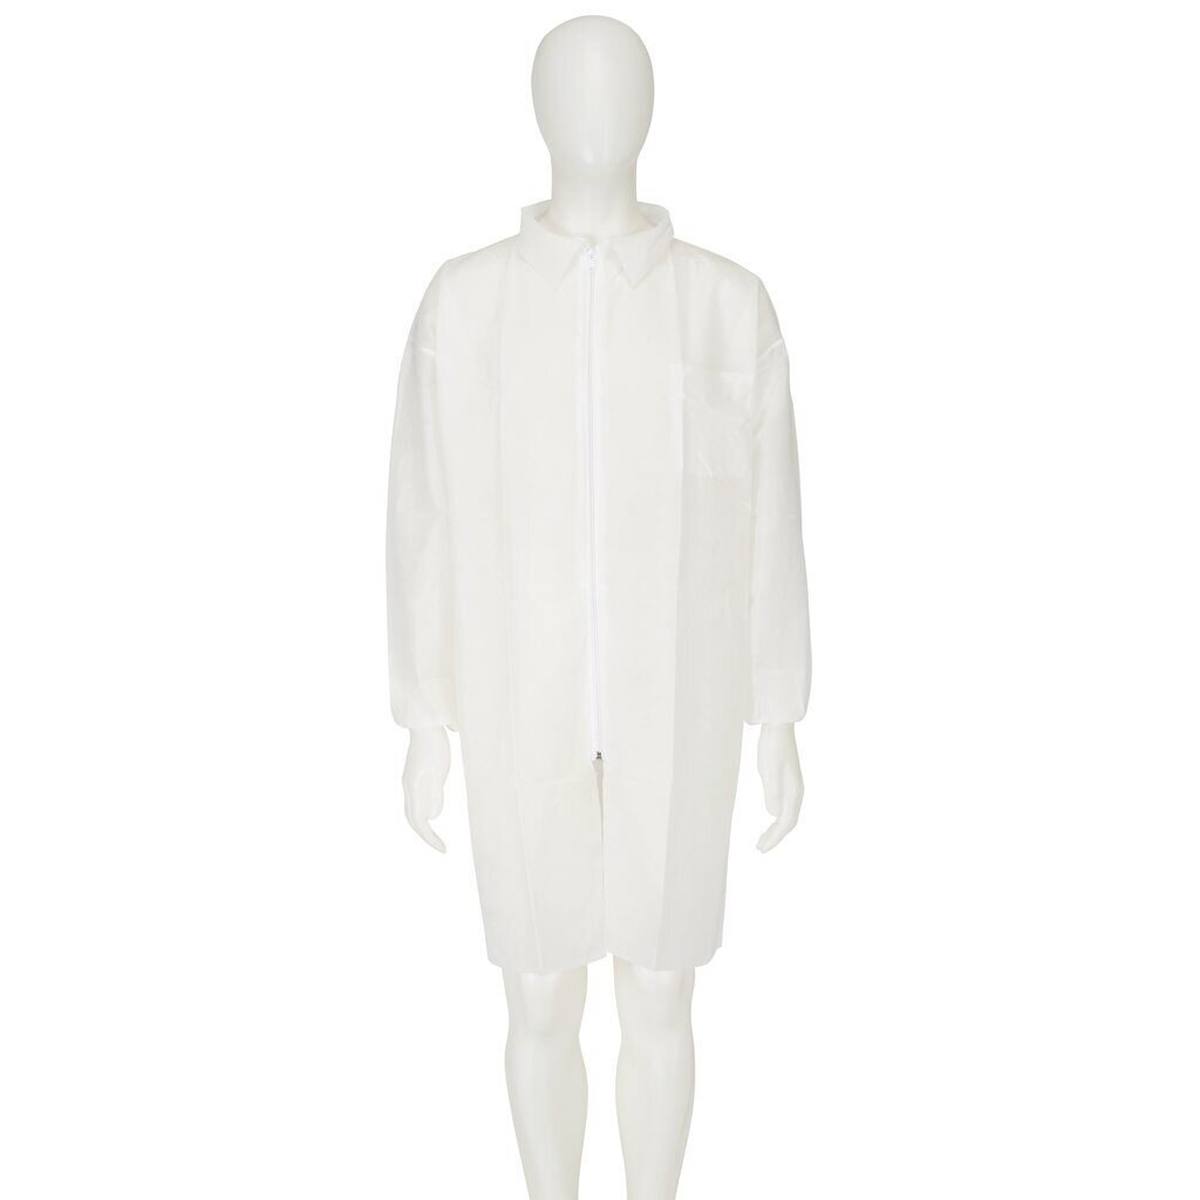 3M 4400 Coat, white, size 3XL, material 100% polypropylene, breathable, very light, with zip fastener